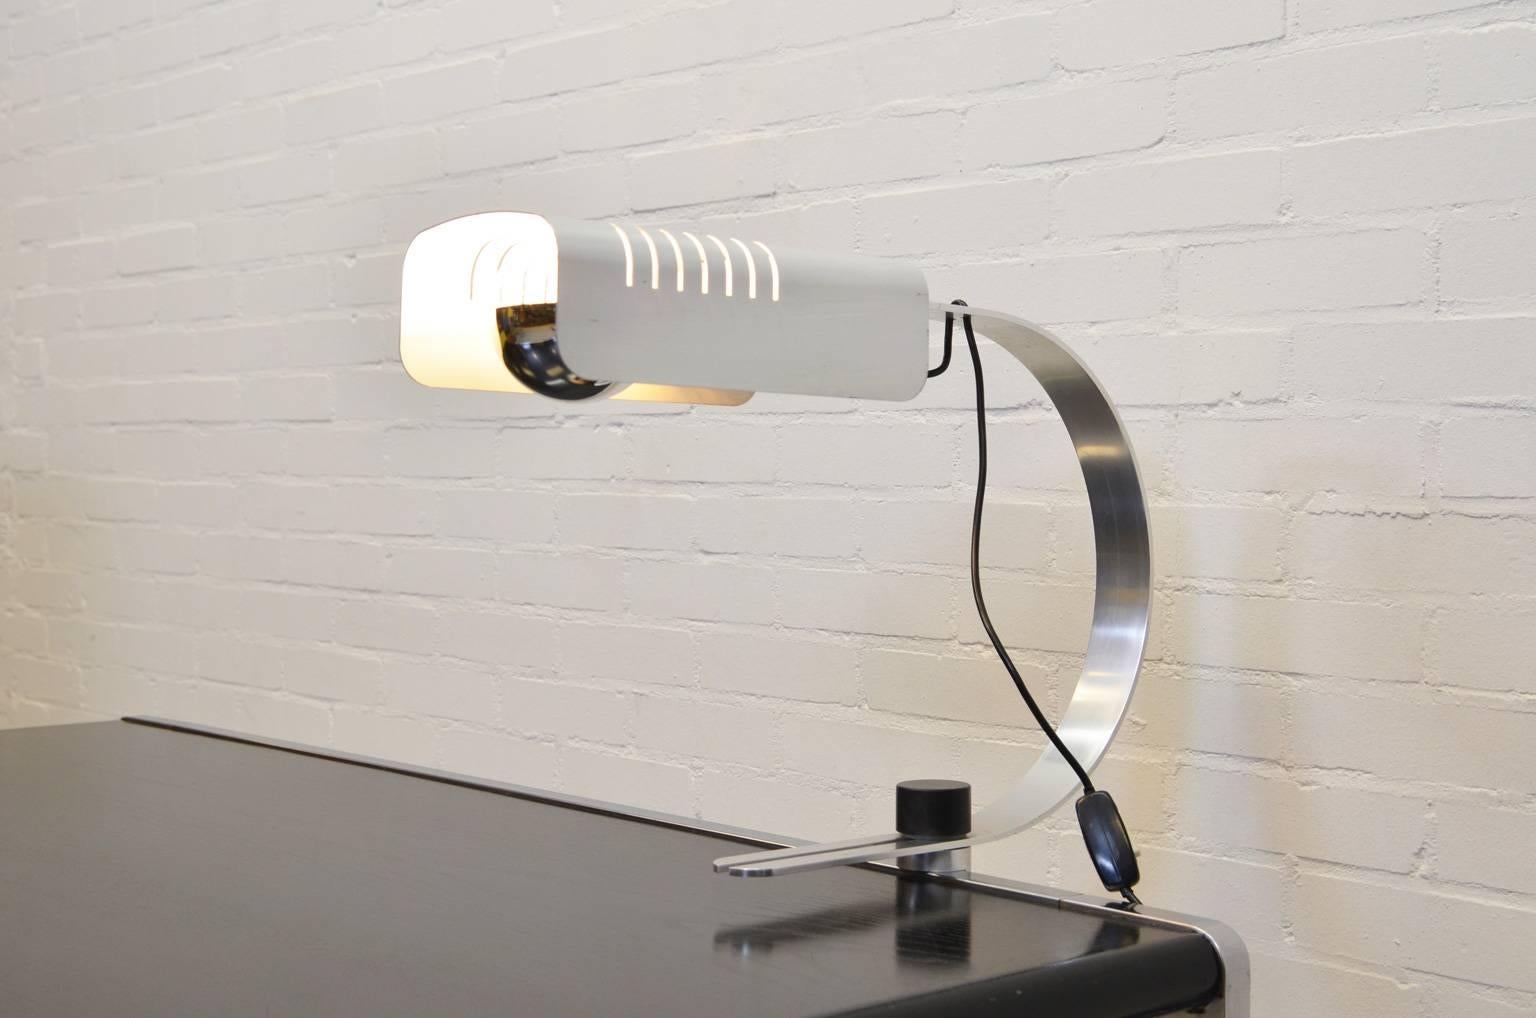 Beautifully designed lamp, elegant lines and nice details. An eye-catcher on your desk or table. The lamp can be attached to your table or desk with a black, plastic screw. 